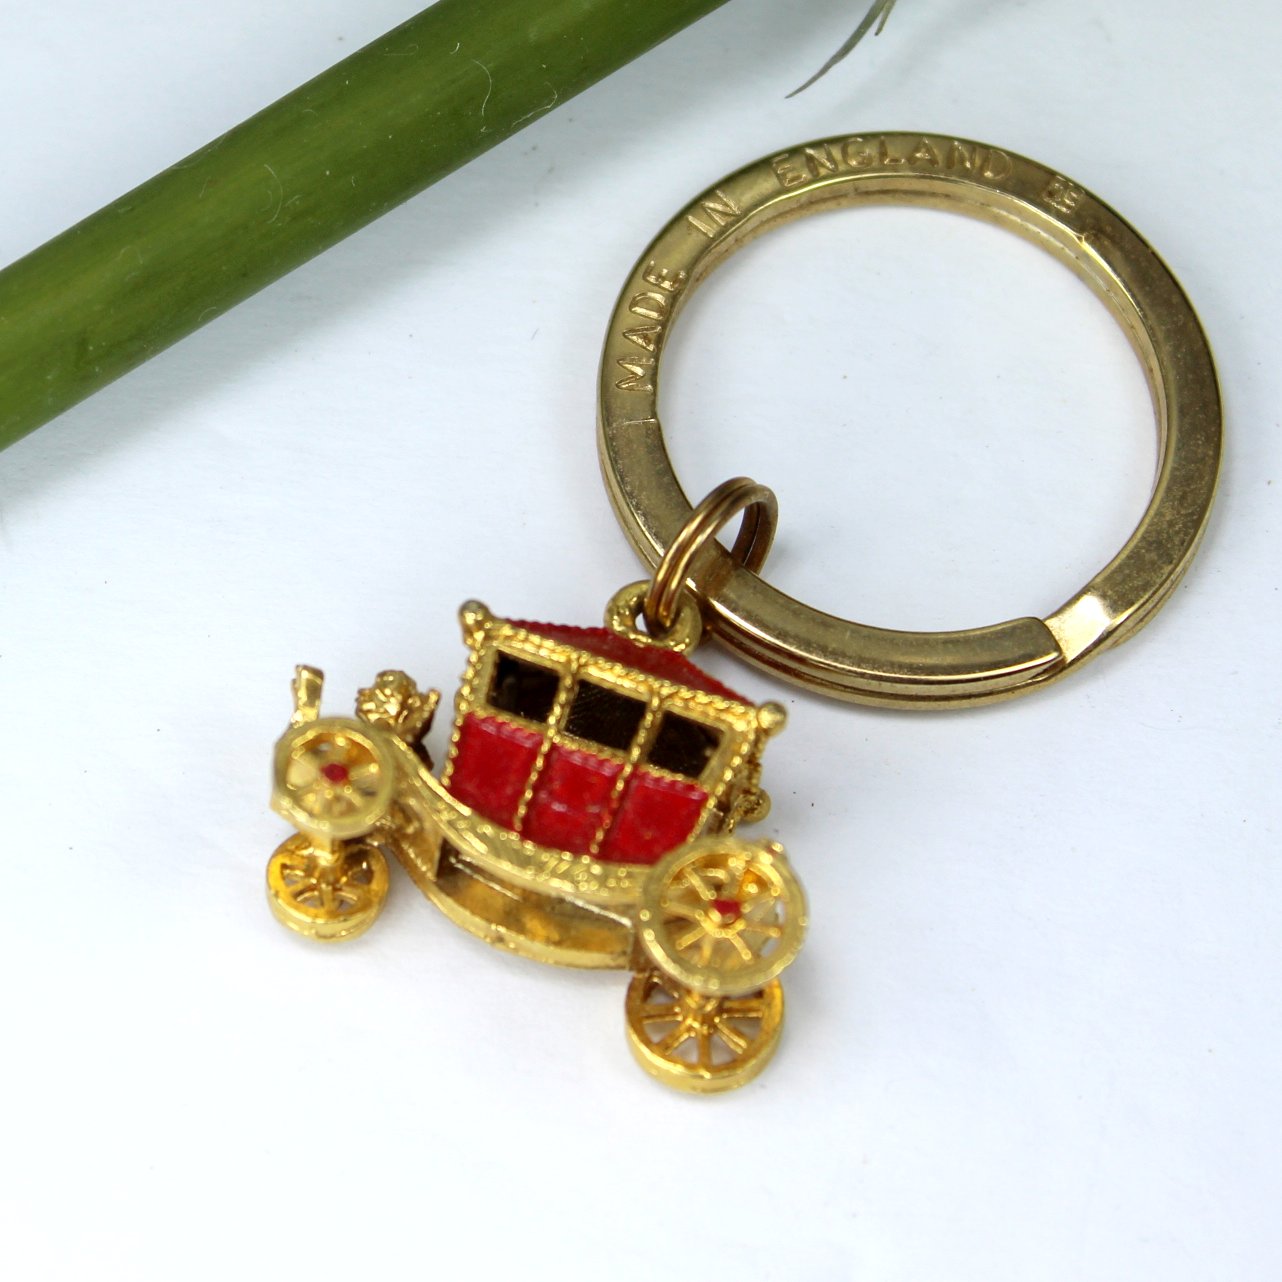 Keychain Key Ring Queen's Carriage Made England Heavy Vintage Unused side view carriage